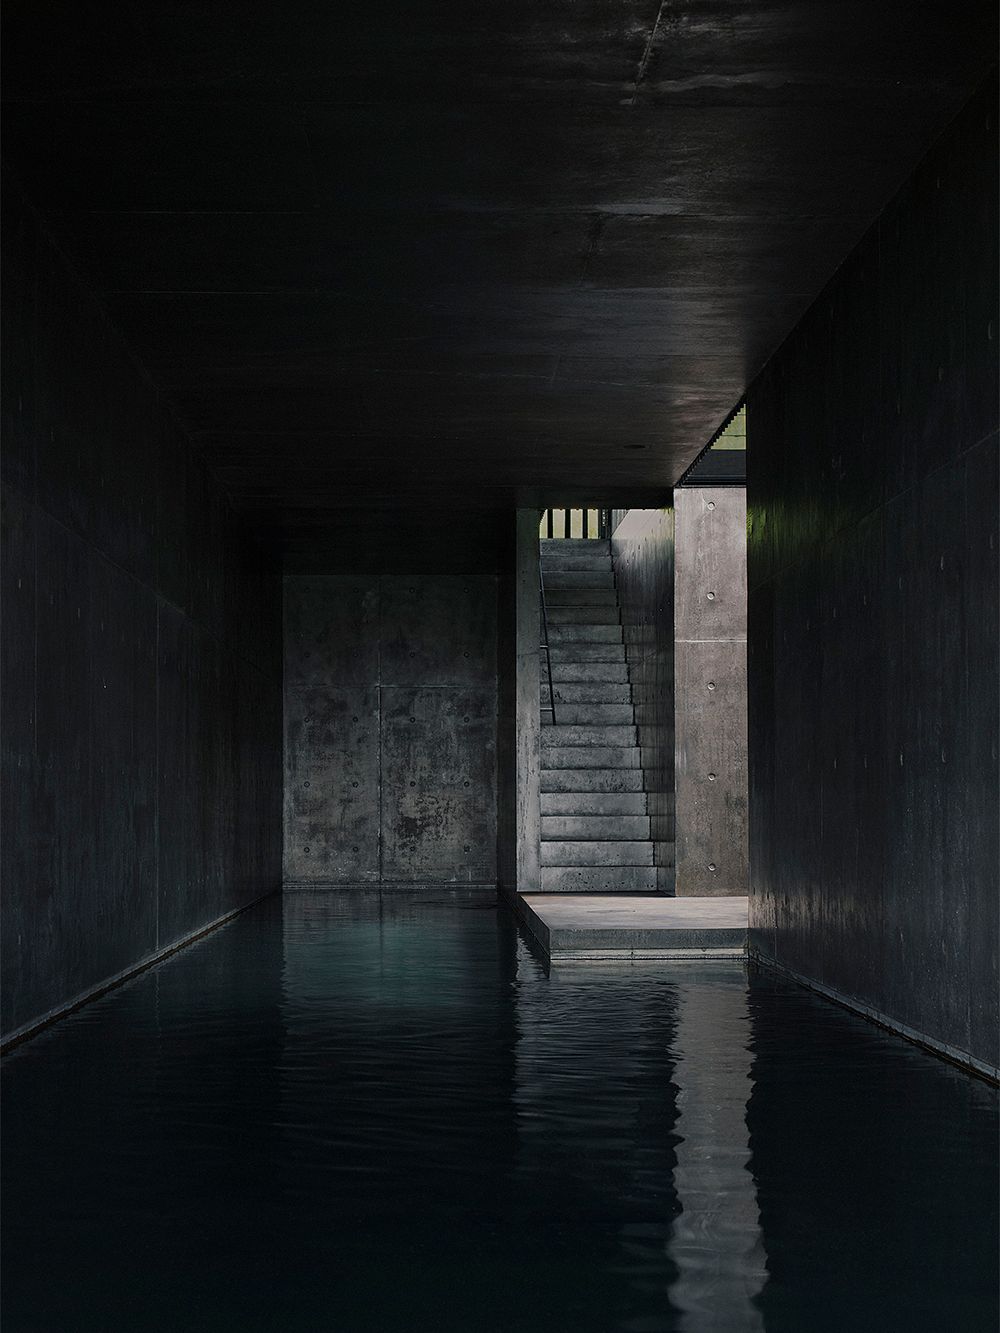 An image of the interior of Federal House, designed by Edition Office: the pool area.